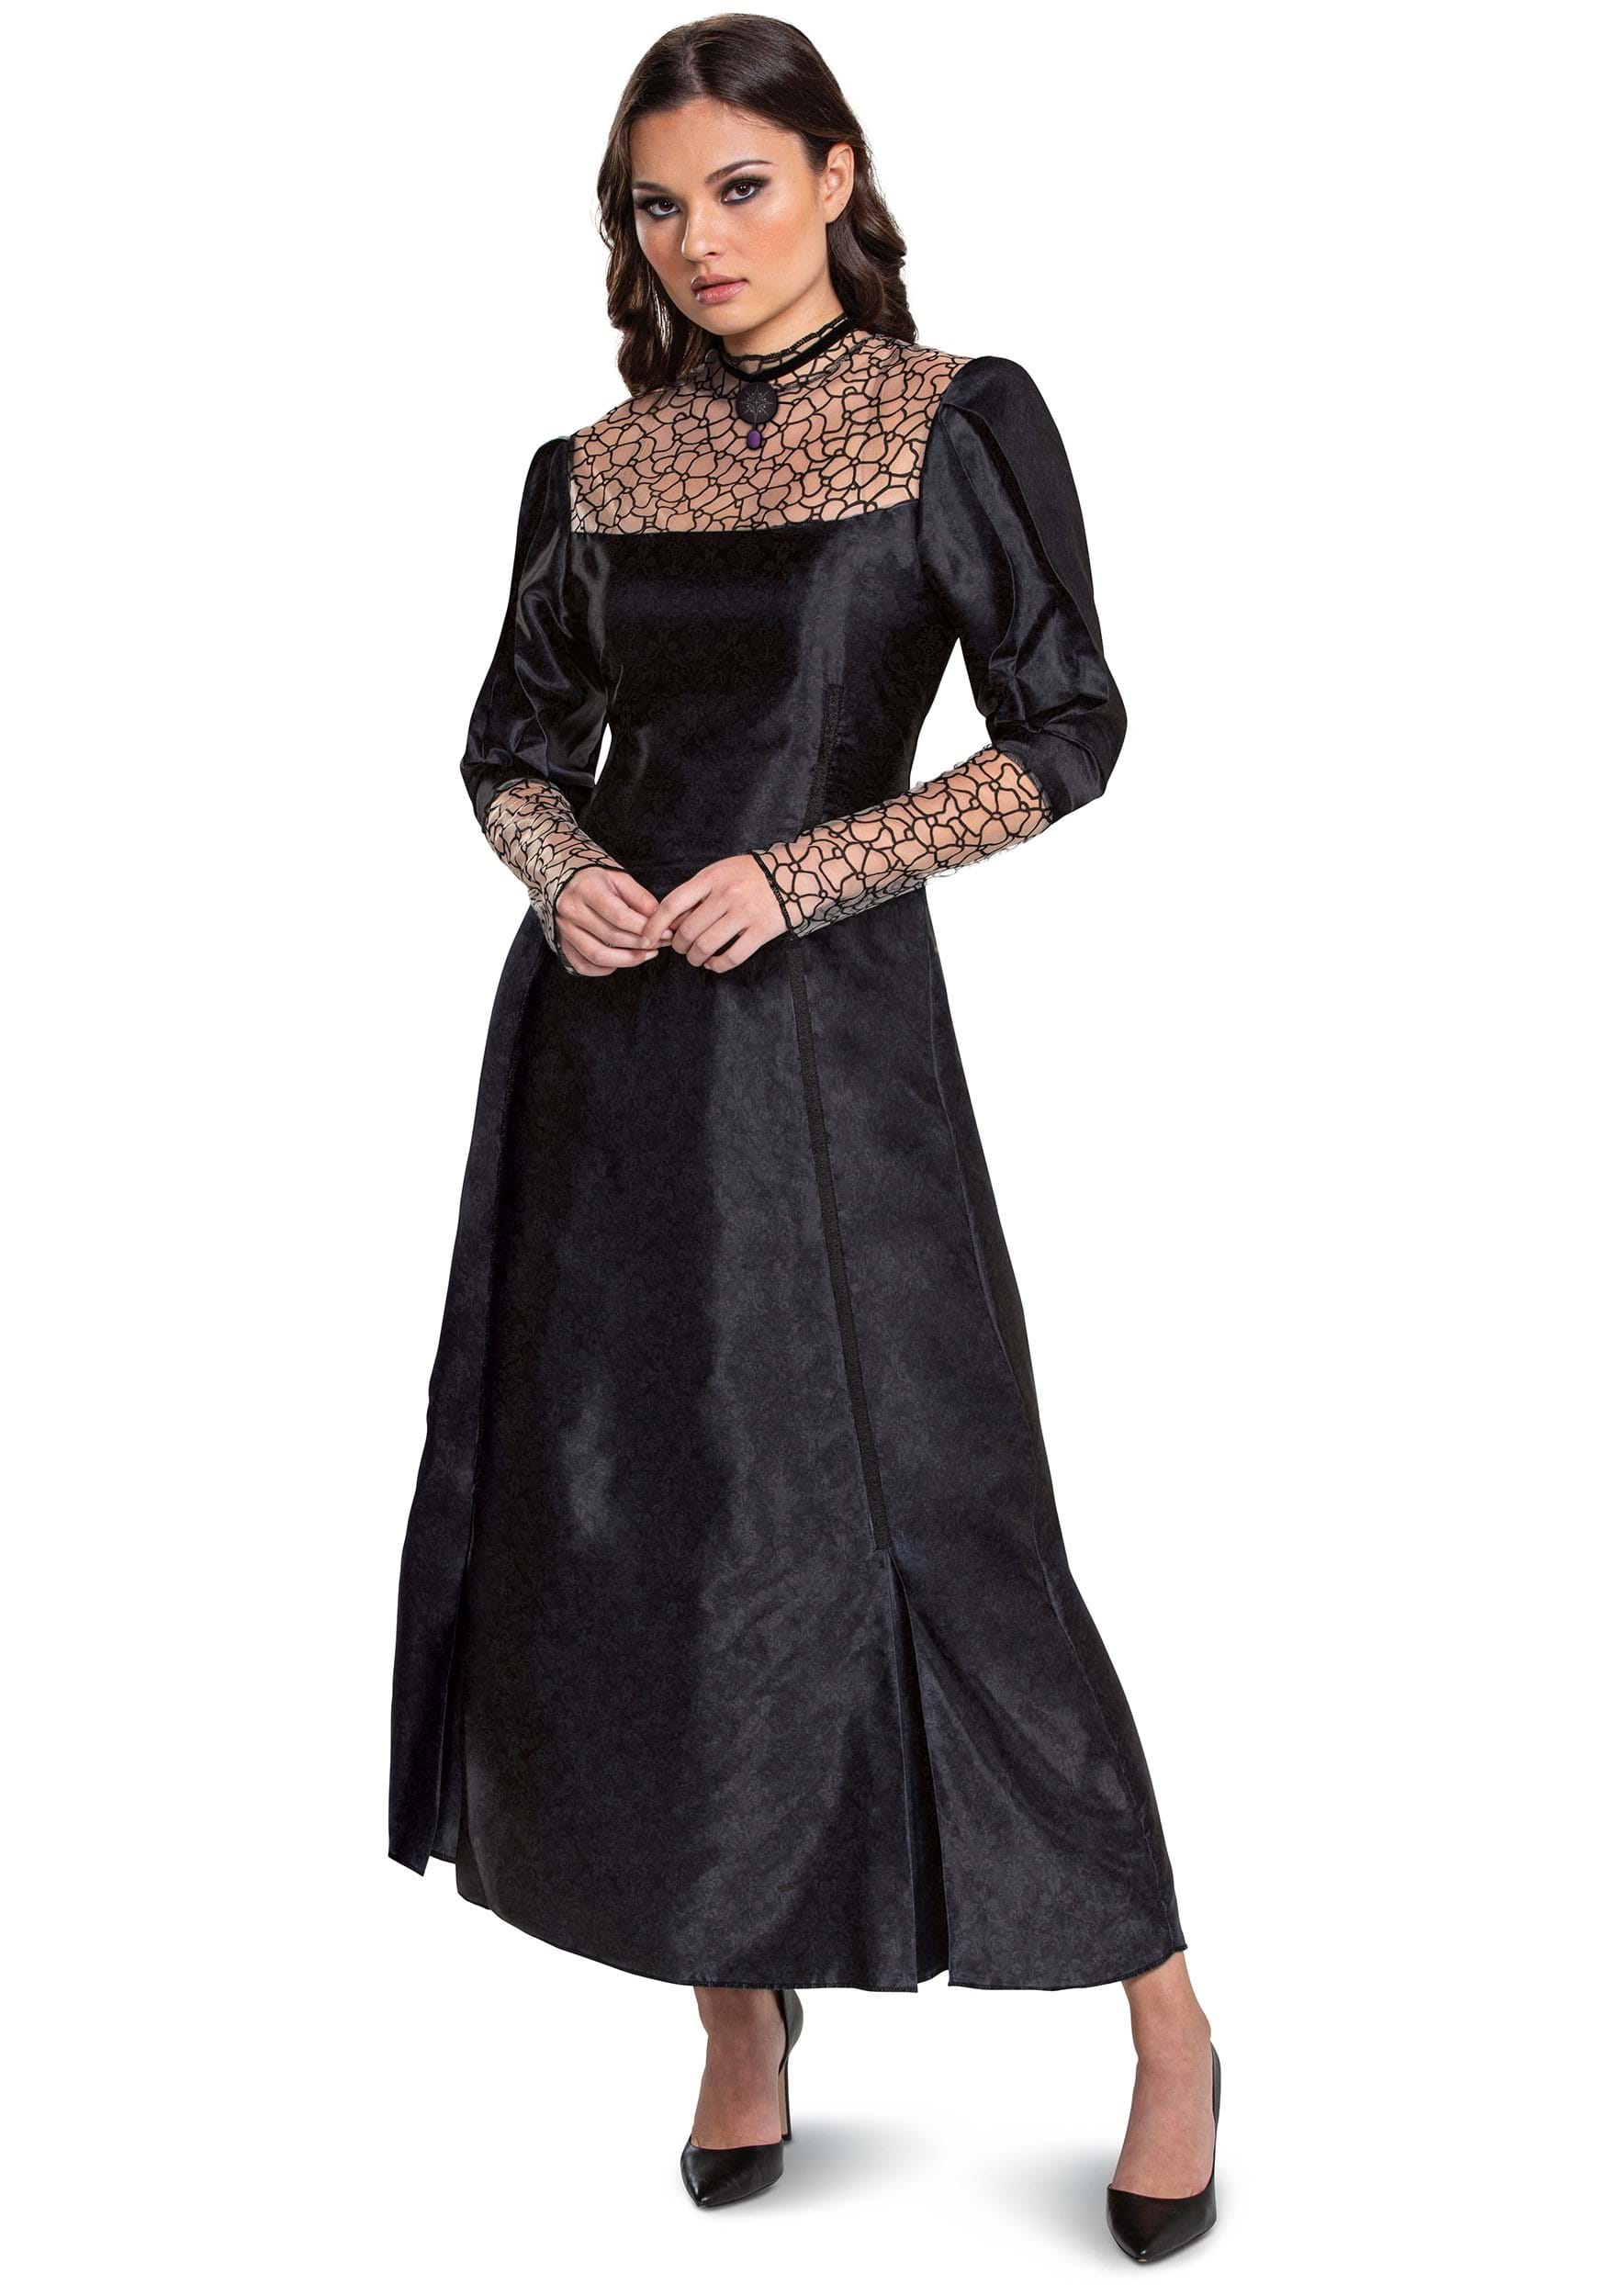 Photos - Fancy Dress Classic Disguise Women's The Witcher  Yennefer Costume Black/Beige 